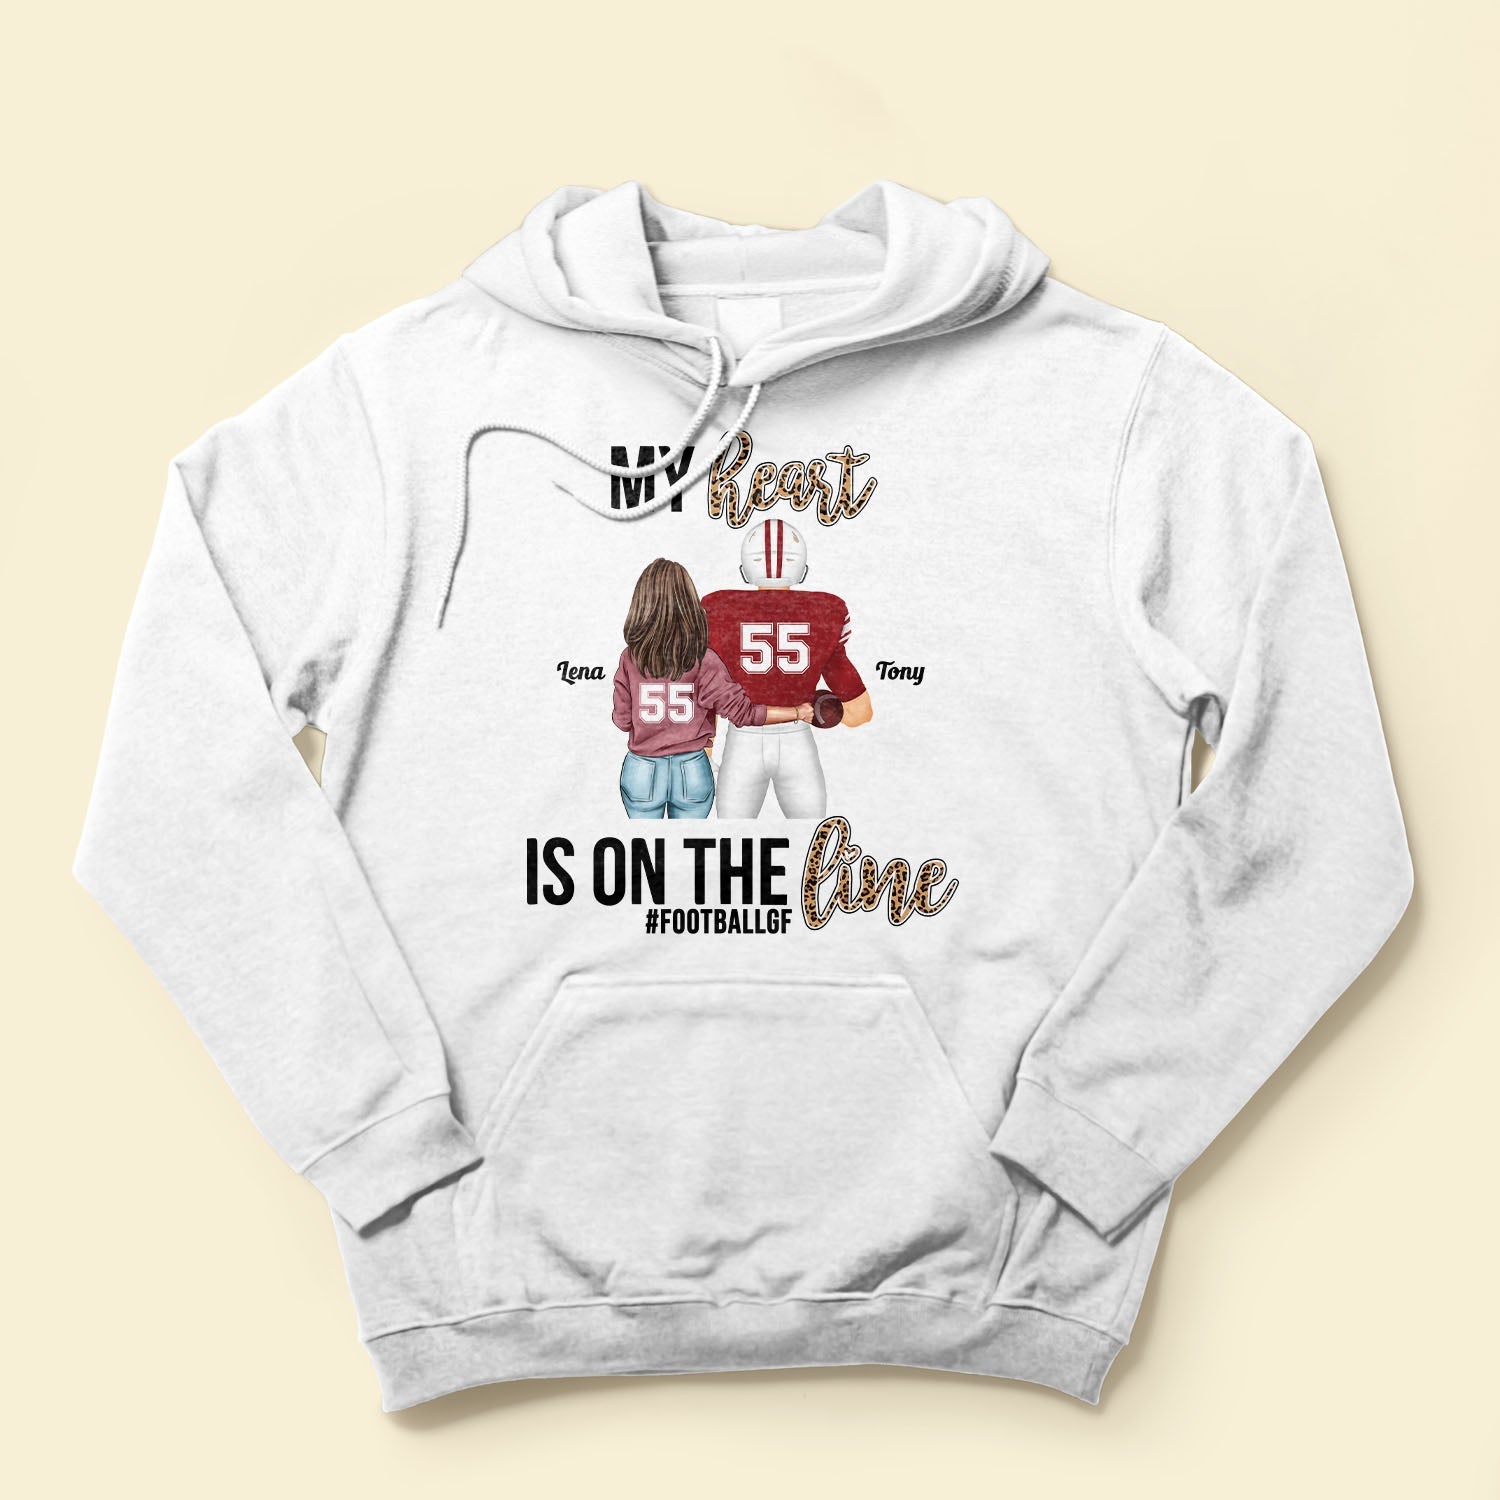 Love Her Merch – Official Logo Products from Lover Her Feet